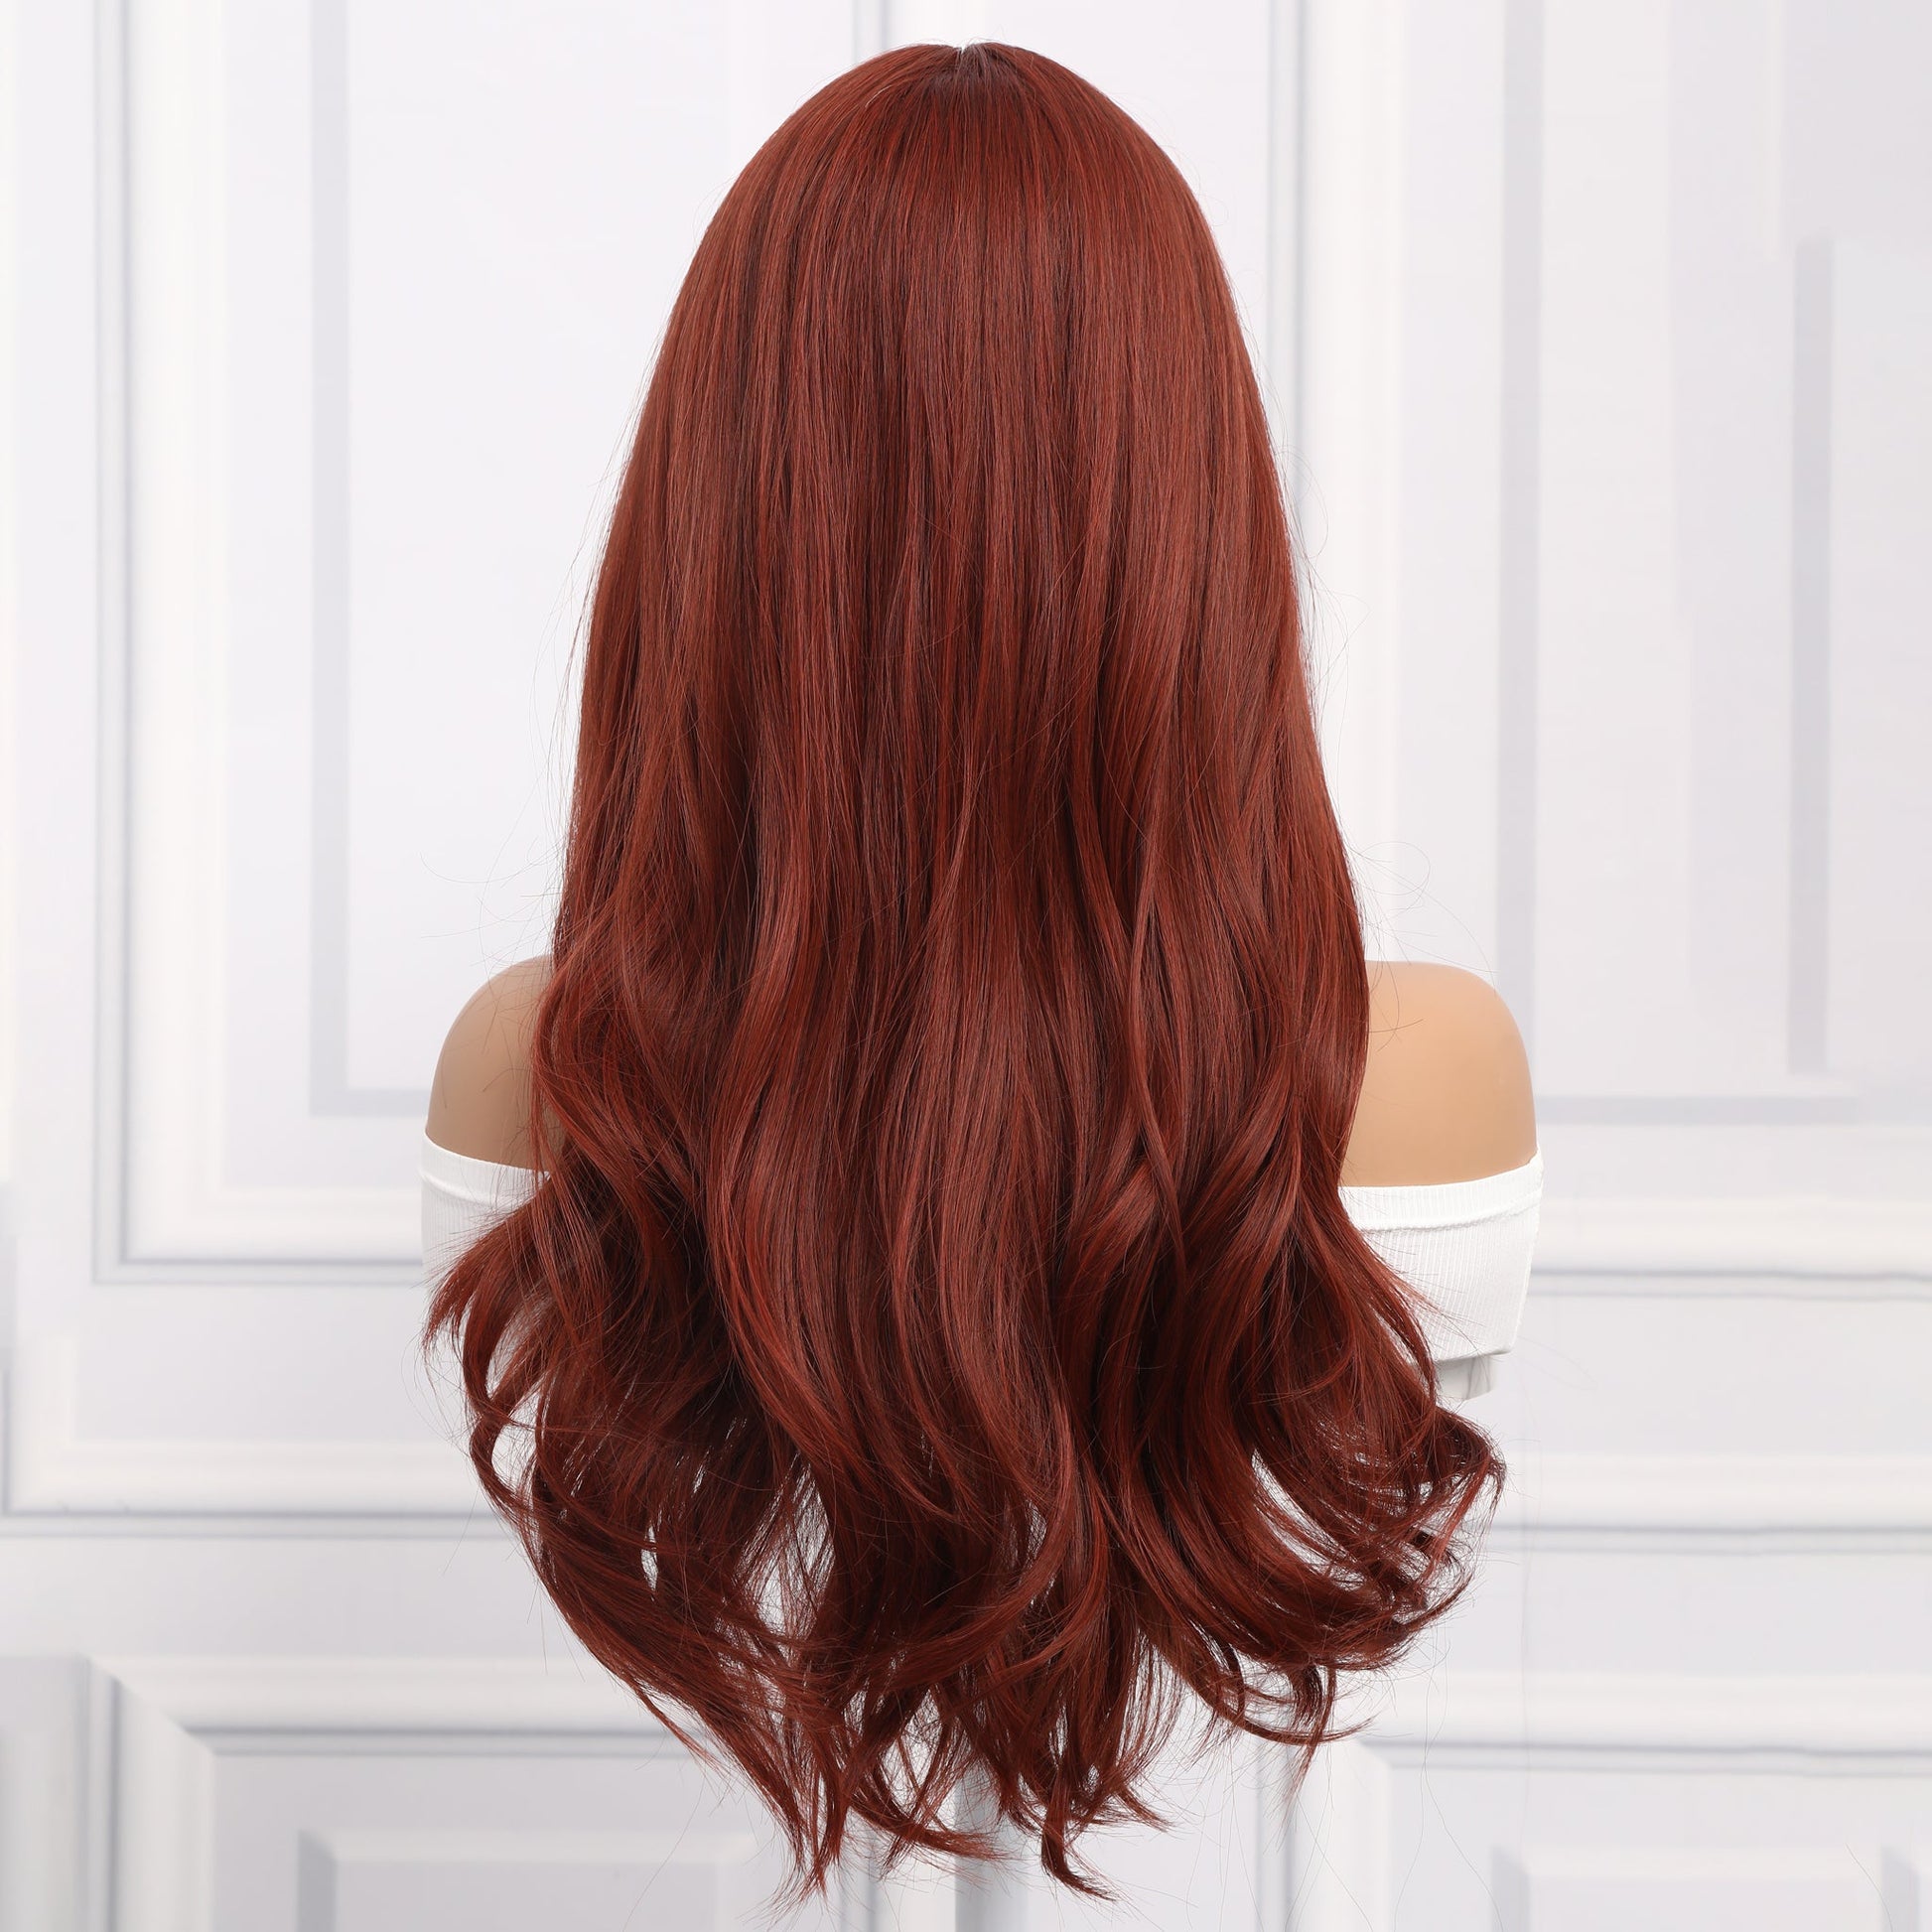 24-inch | Brown Loose Wave with Hair Bangs | SM8029 - TapLike